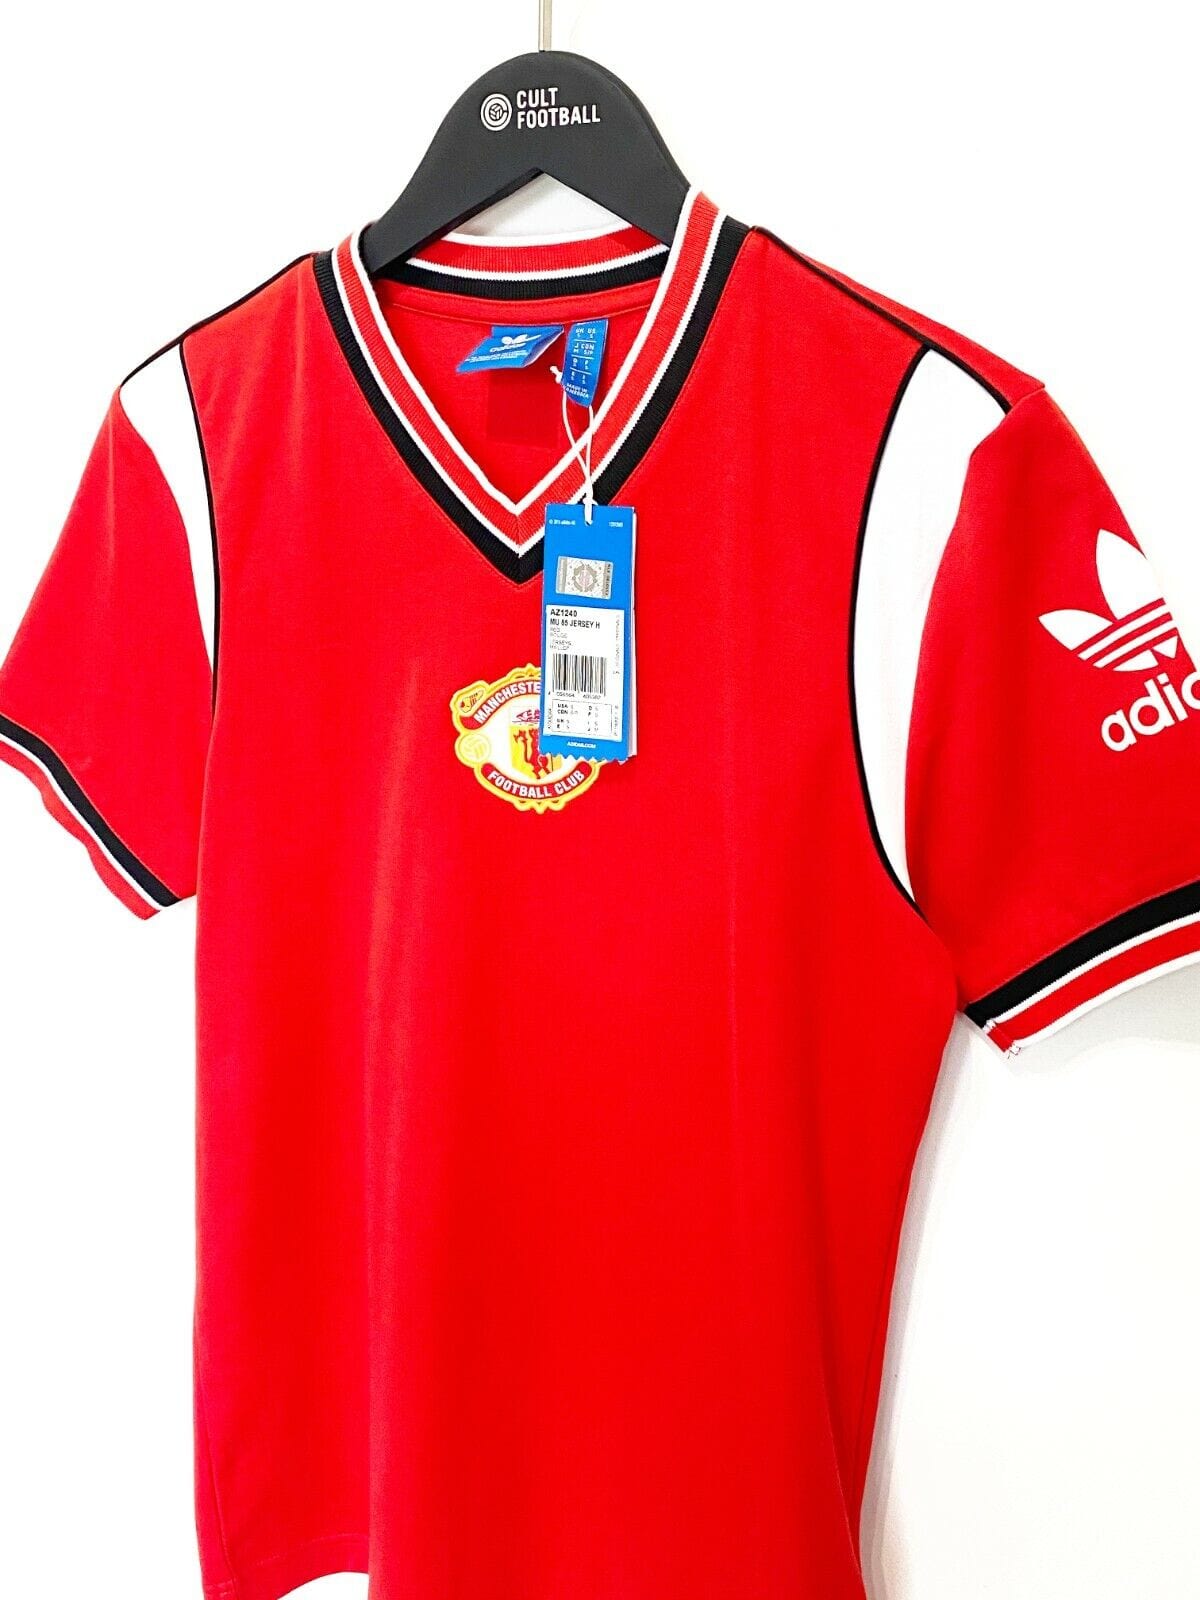 Man Utd Retro Football Shirts products for sale